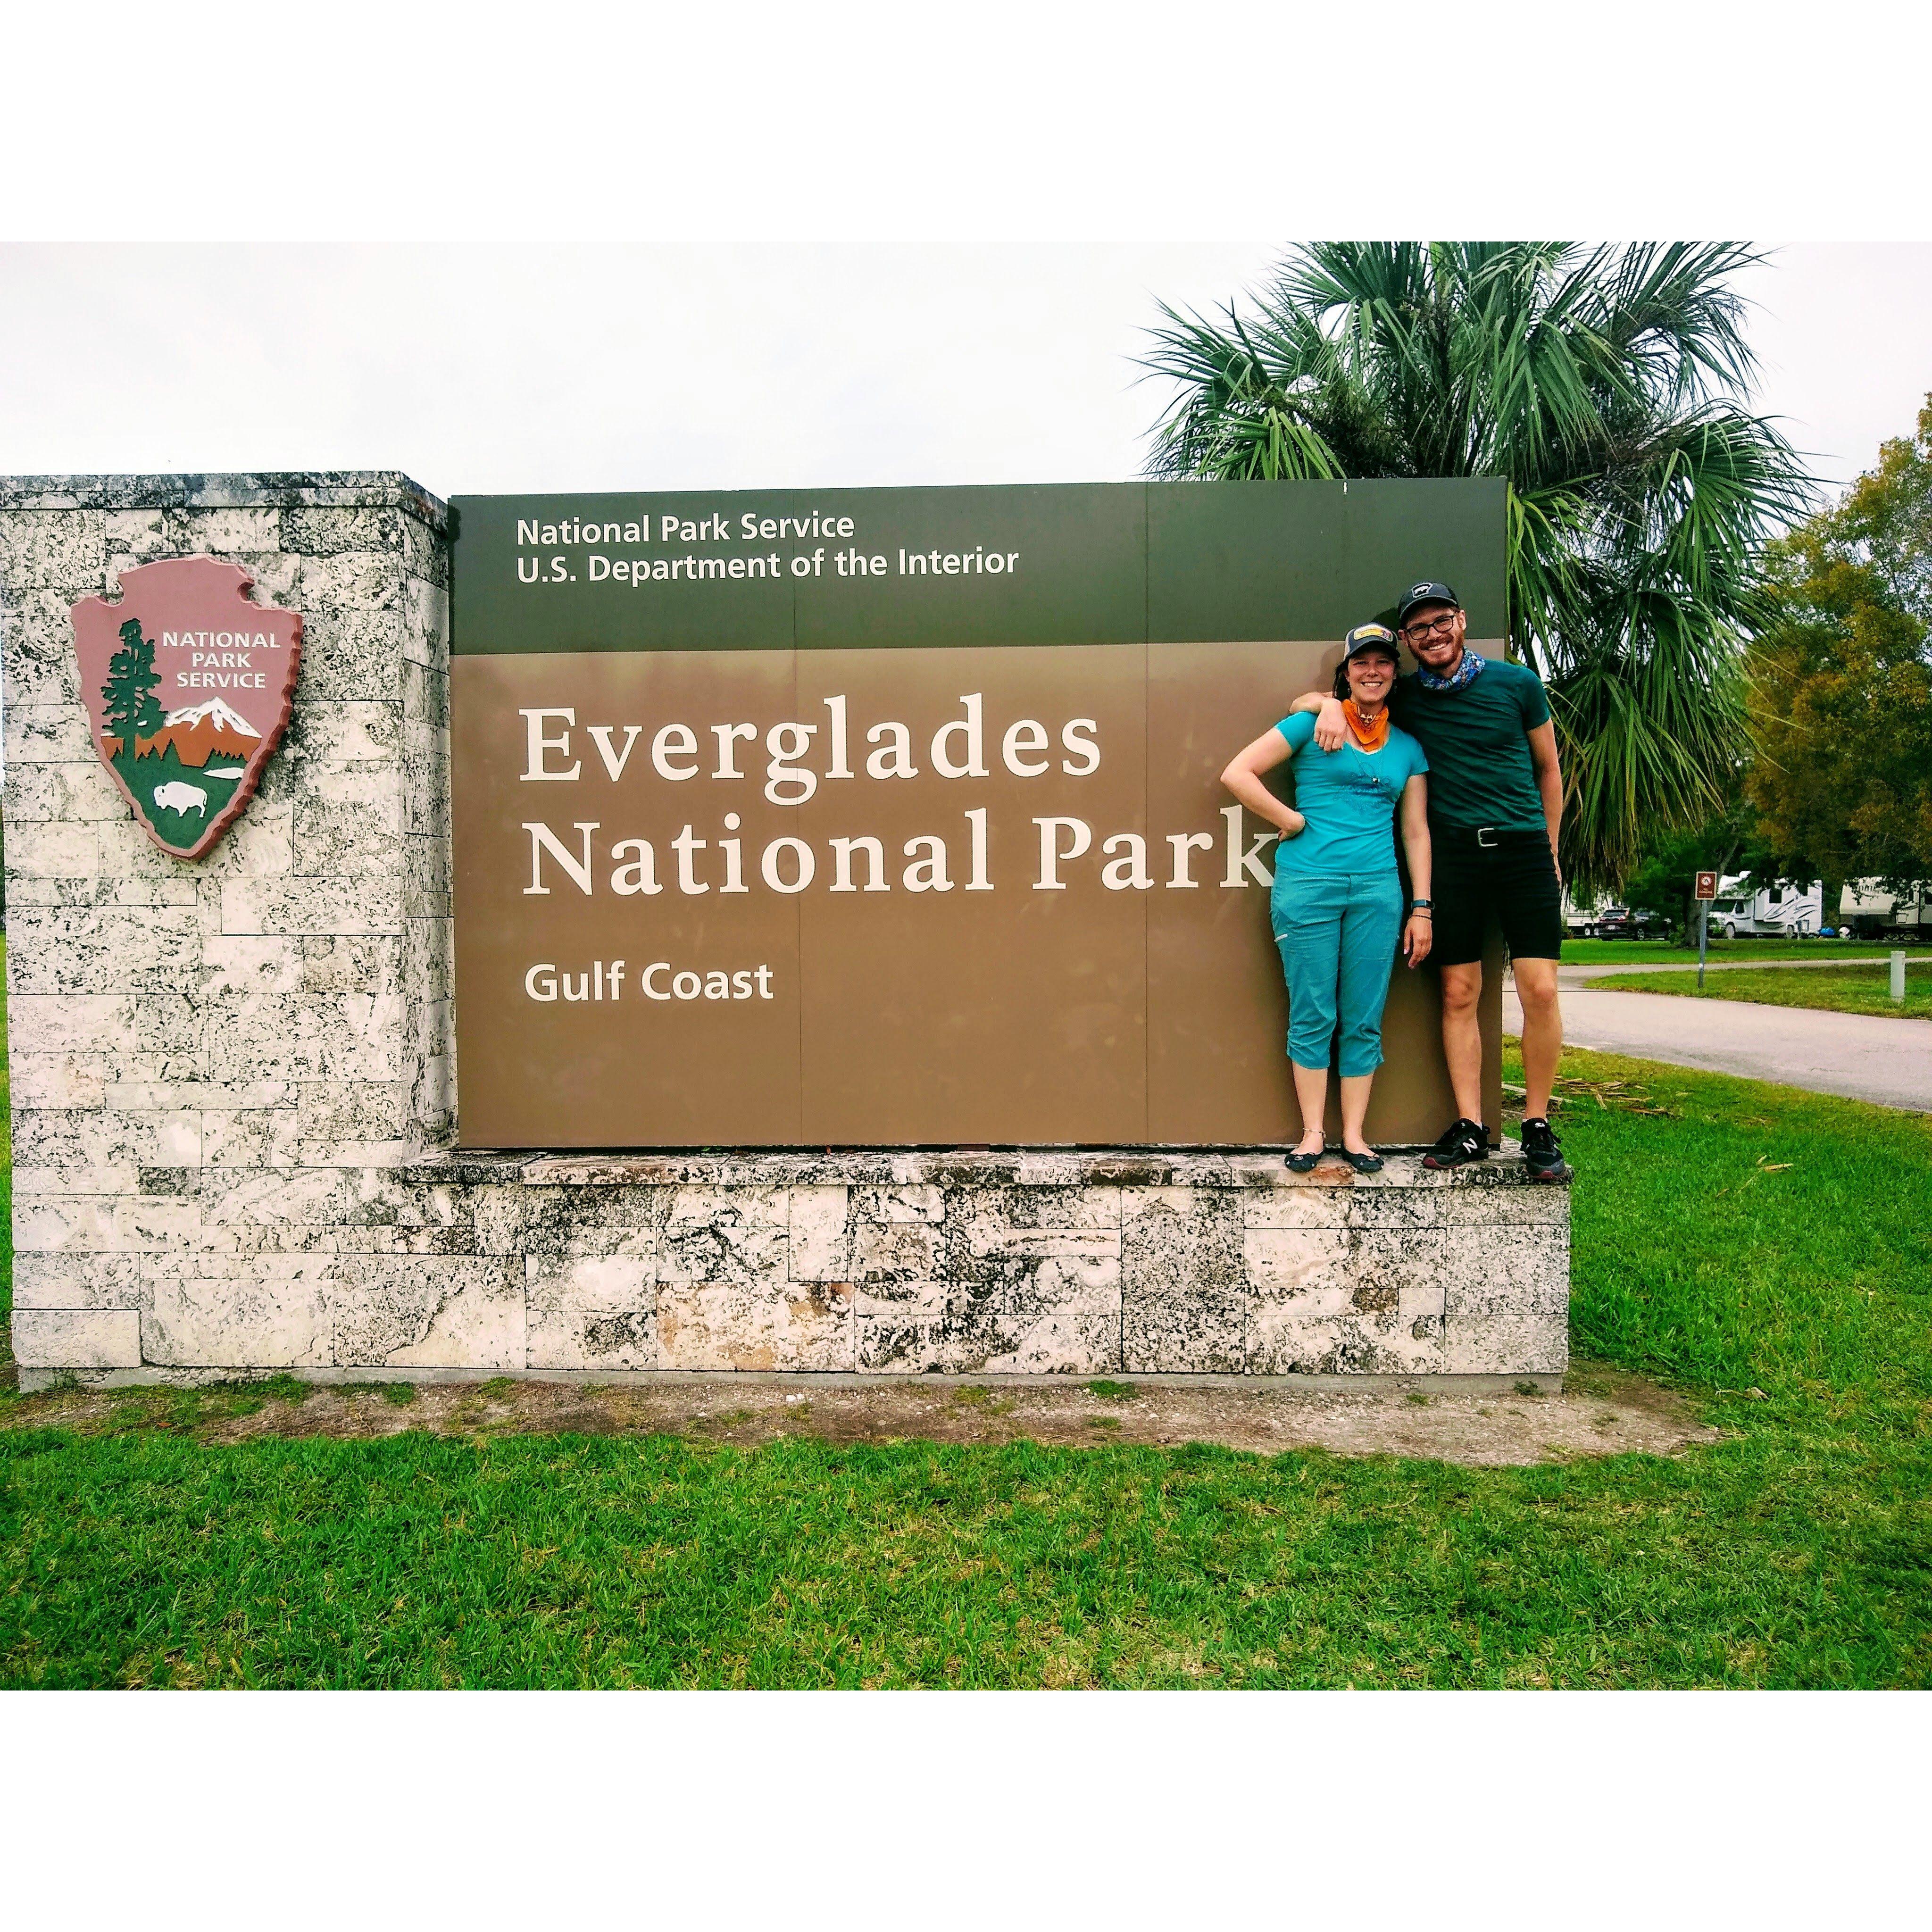 Off to the Everglades! April 2022